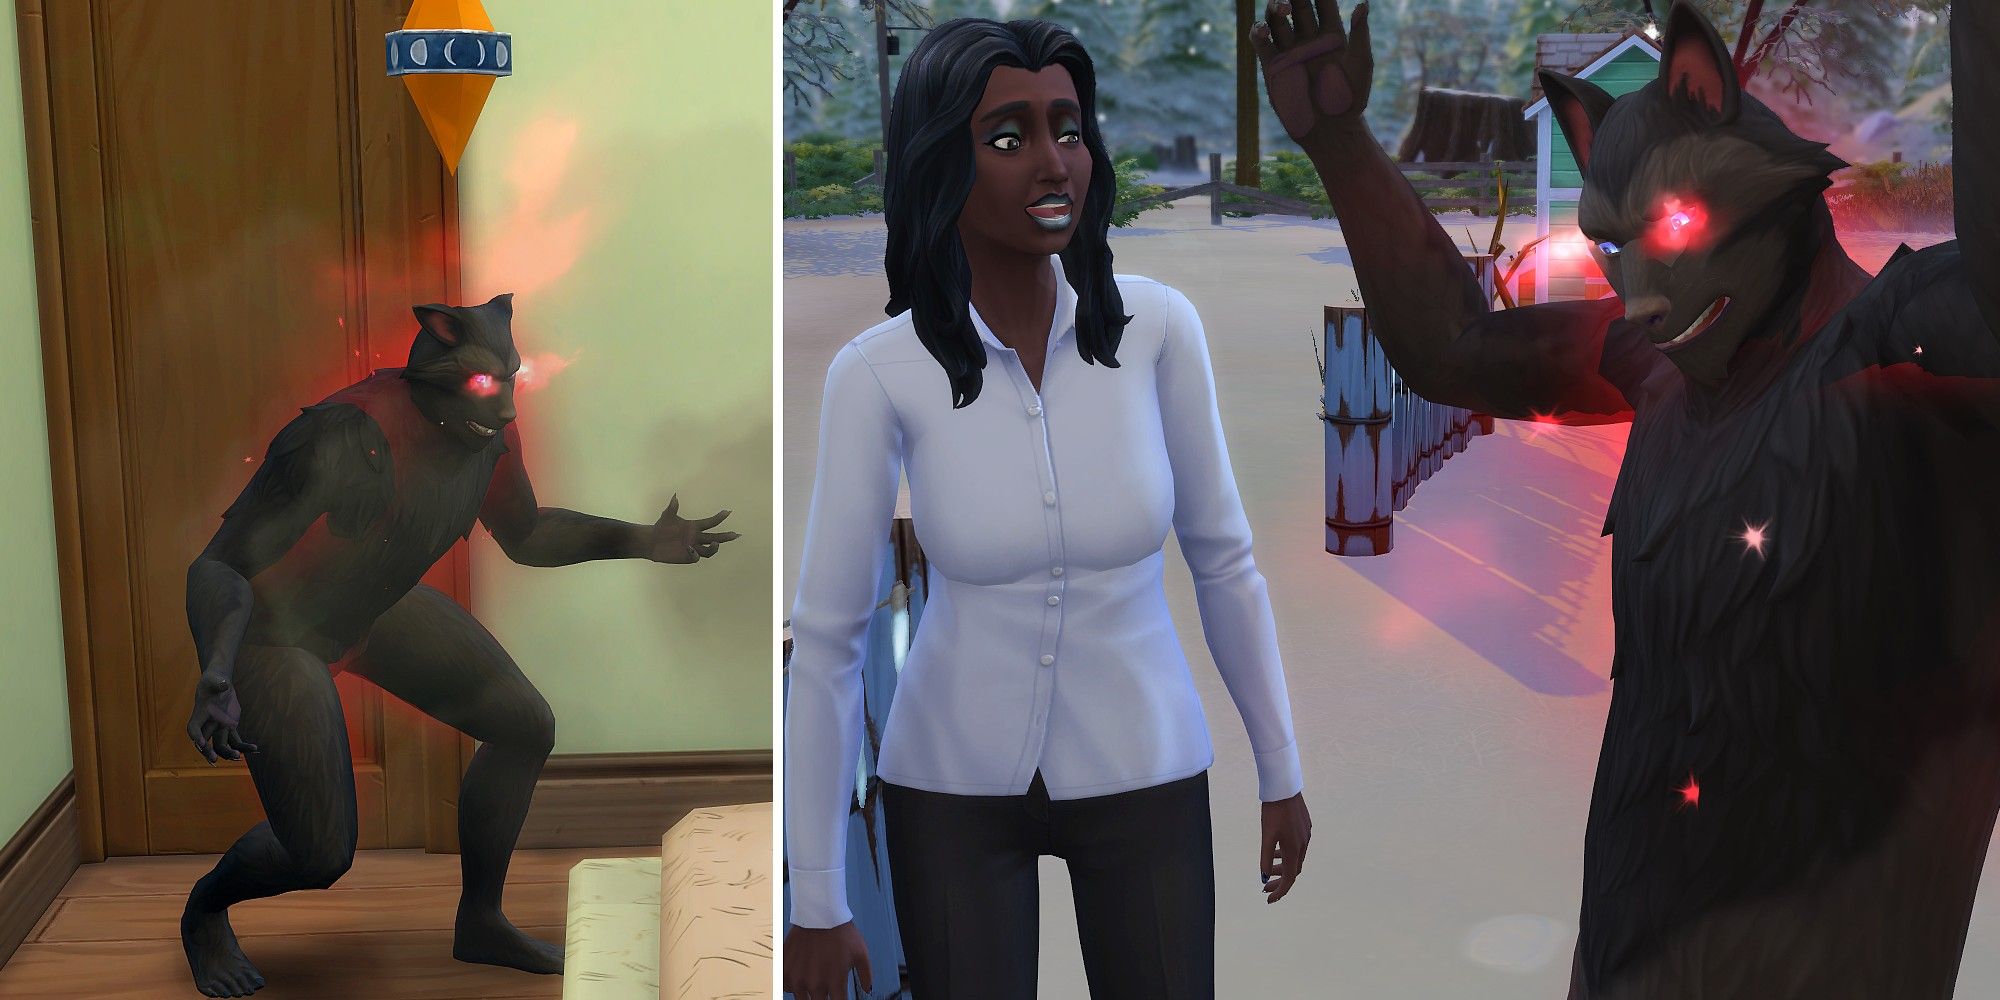 A werewolf Sim with dangerously high fury levels in The Sims 4